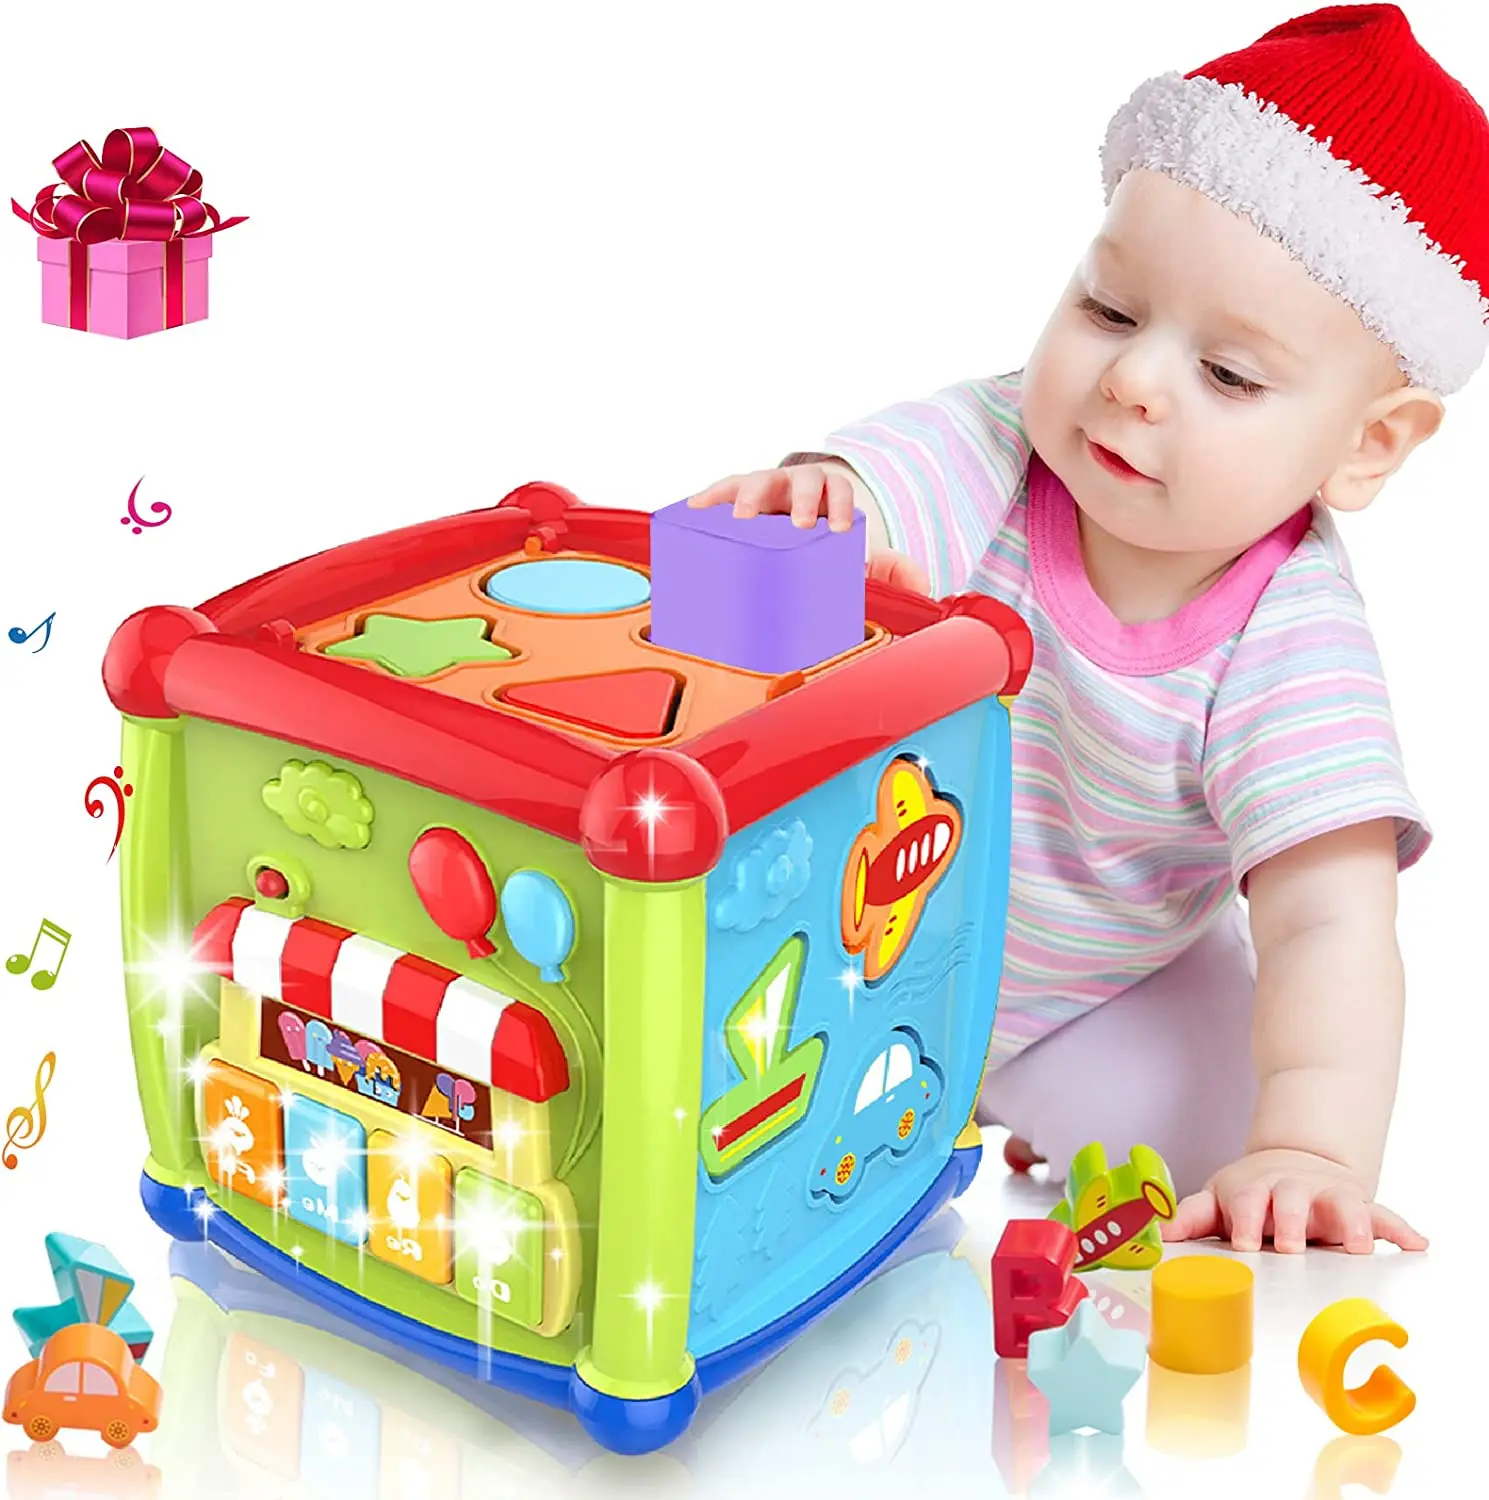 

6in1 Multifunction Music Activity Cube Baby Toys 12-18 Months Shape Sort Infant Toy Christmas 1sth Birthday Gifts Toddlers